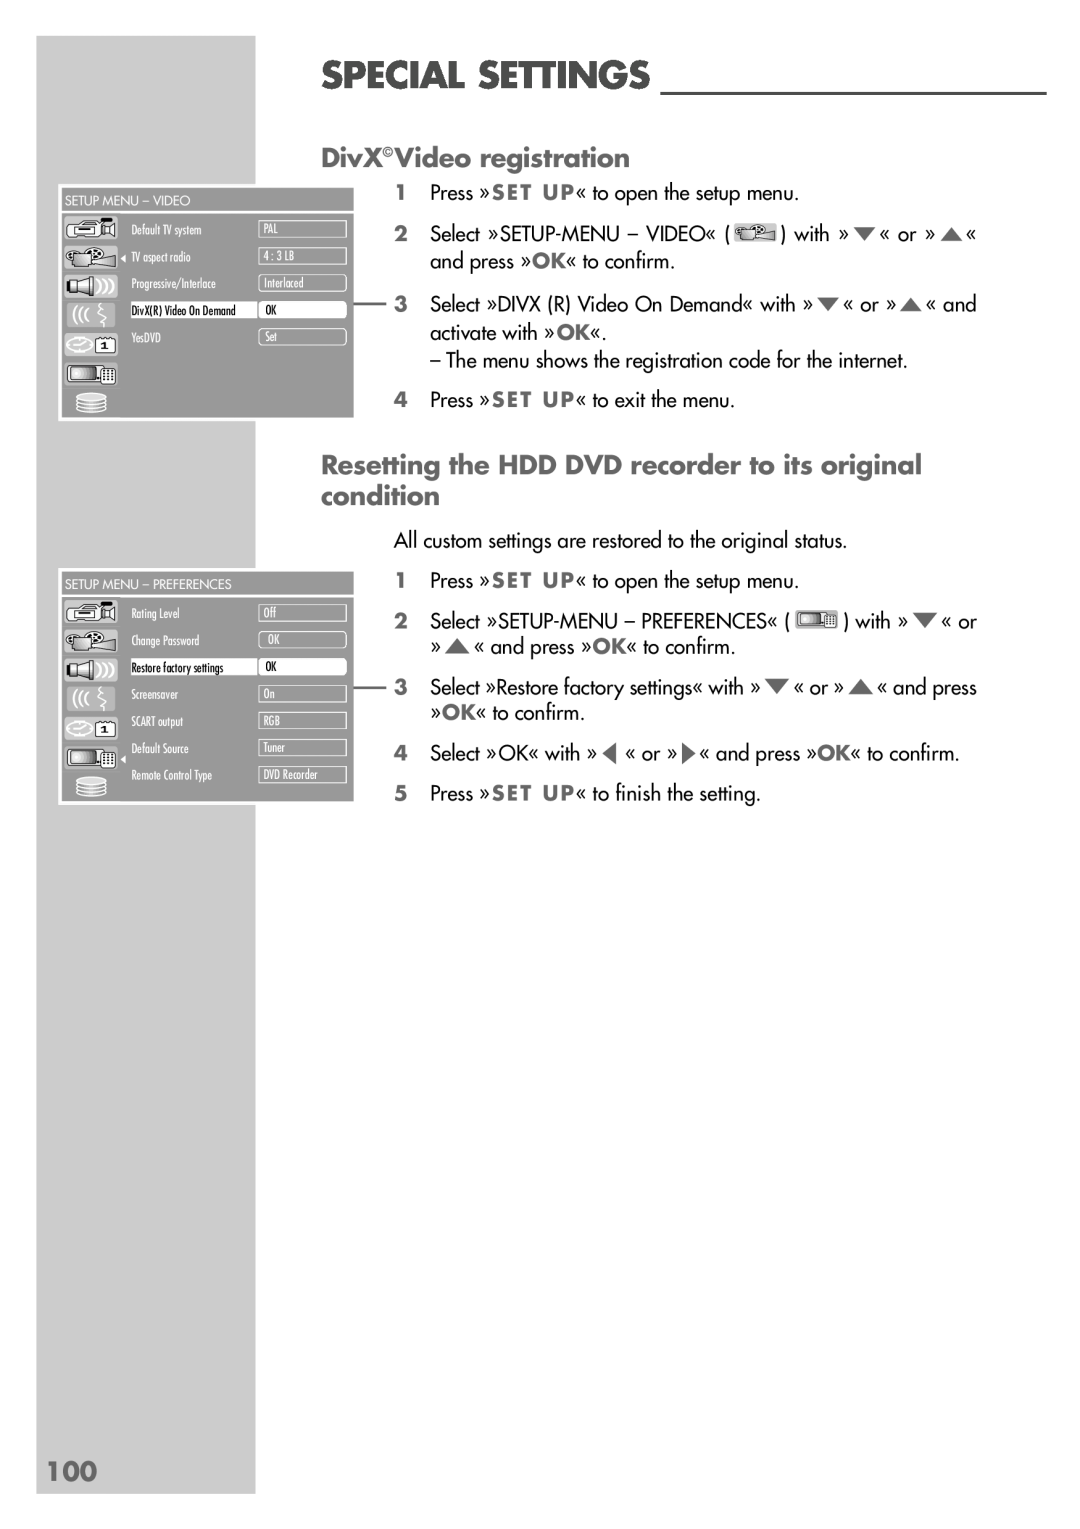 Grundig 5550 HDD manual DivX Video registration, Resetting the HDD DVD recorder to its original condition, Special Settings 